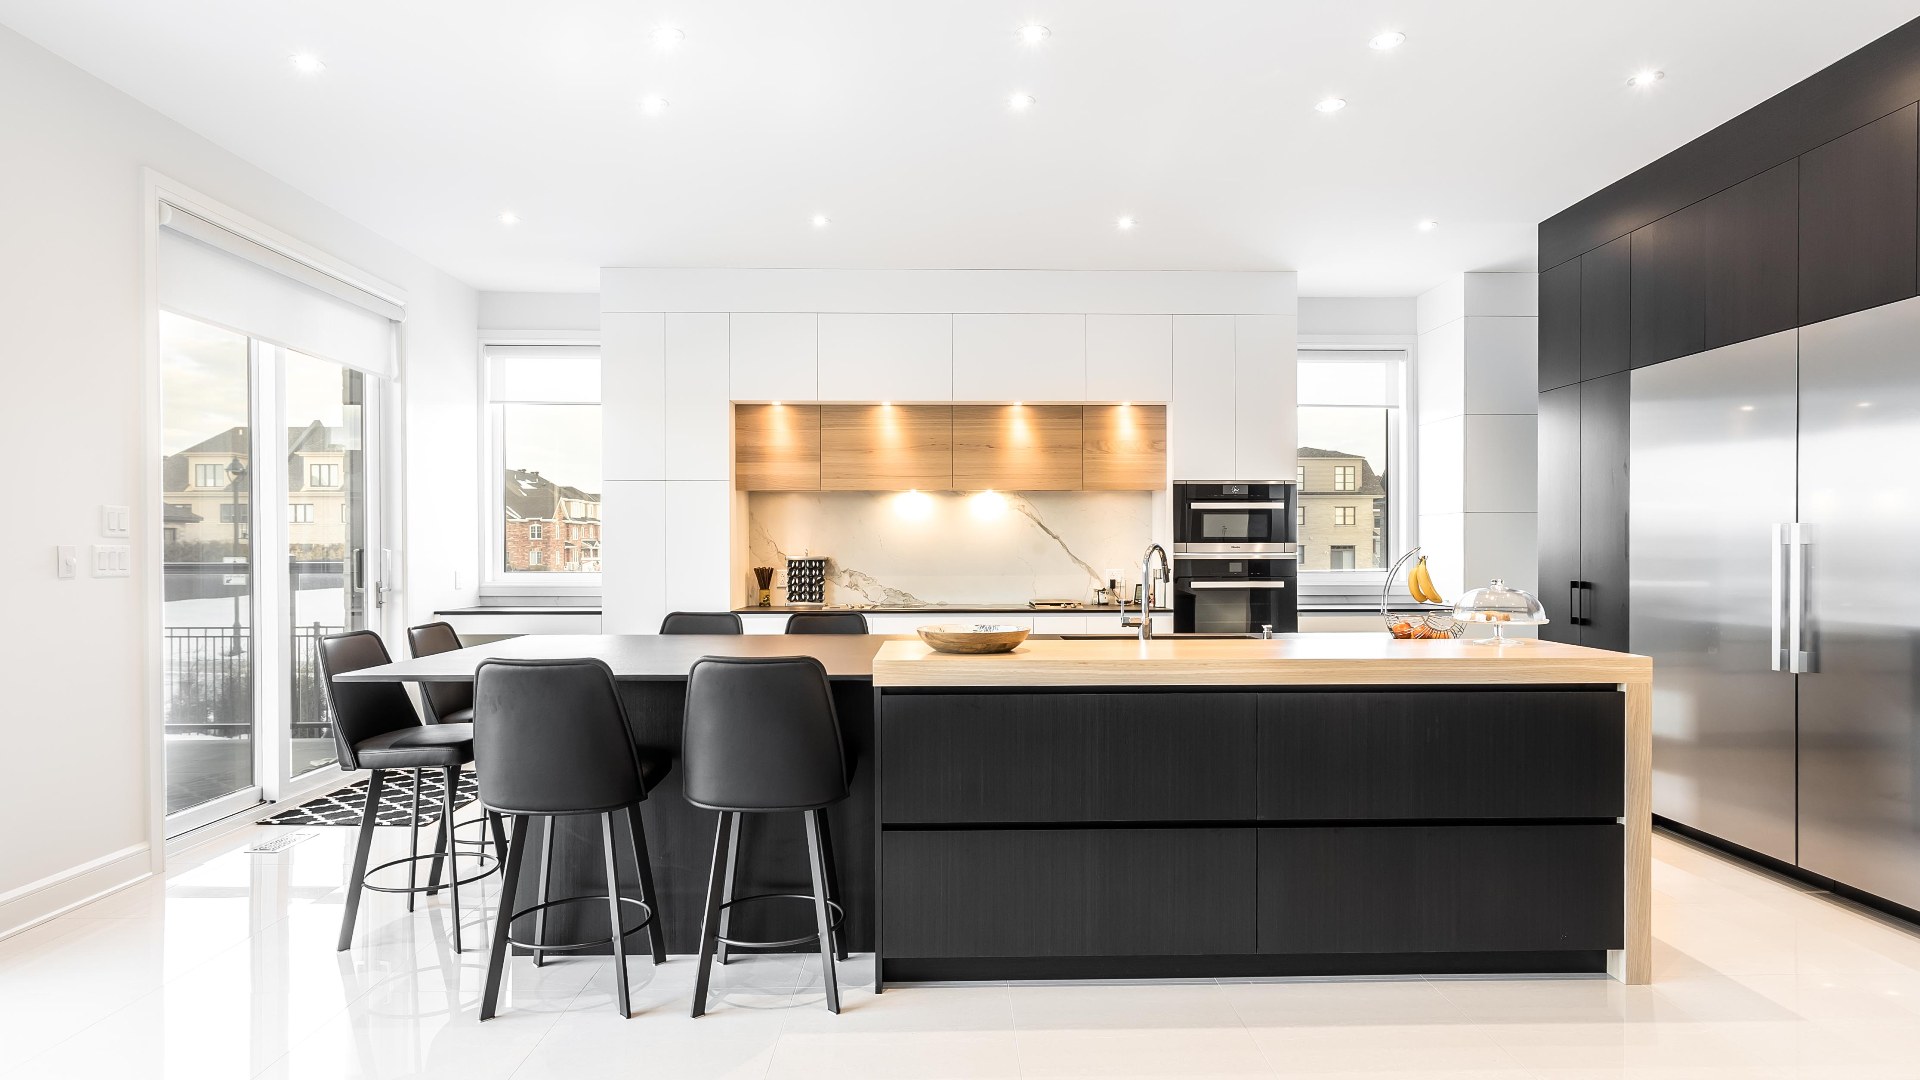 Modern black and white kitchen with Thermoform cabinets accented with oak wood. Luminaires are integrated into kitchen furniture to directly illuminate worktops and counters.